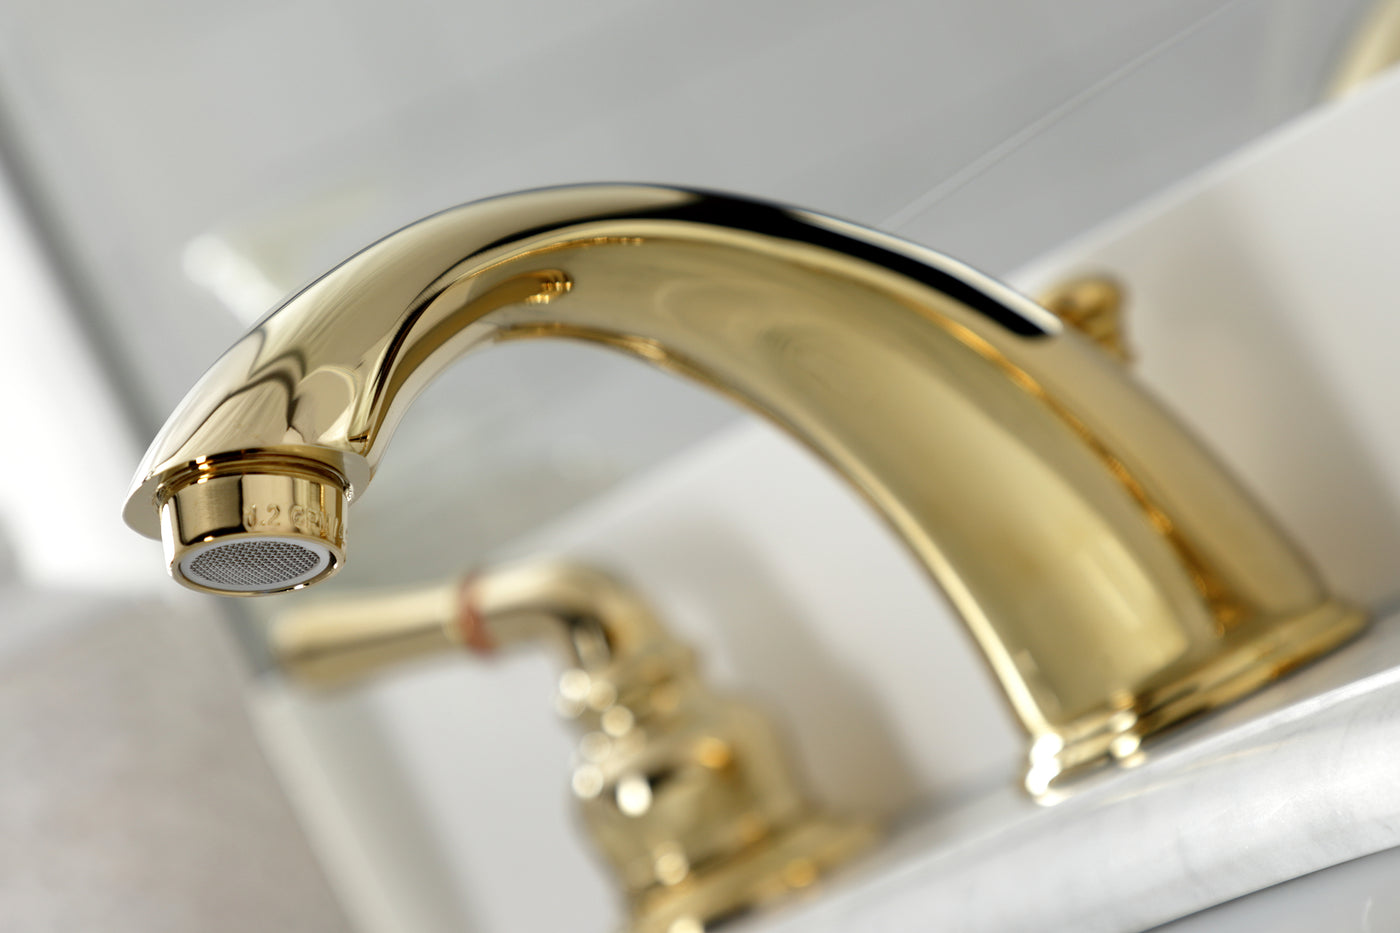 Elements of Design EB962B Widespread Bathroom Faucet with Brass Pop-Up, Polished Brass